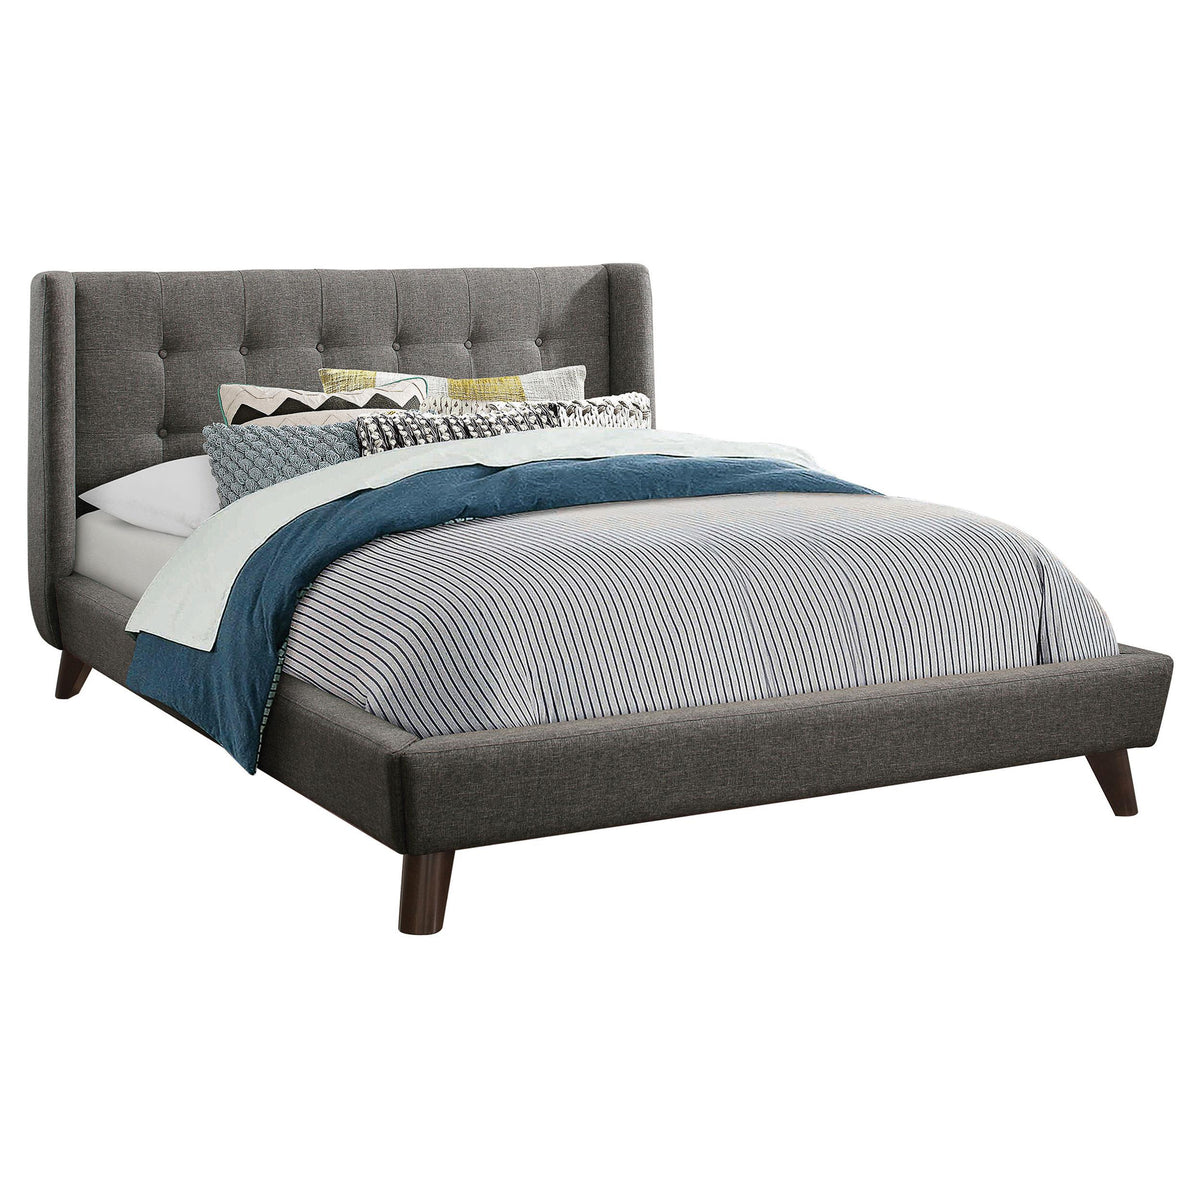 Carrington Button Tufted Queen Bed Grey  Half Price Furniture